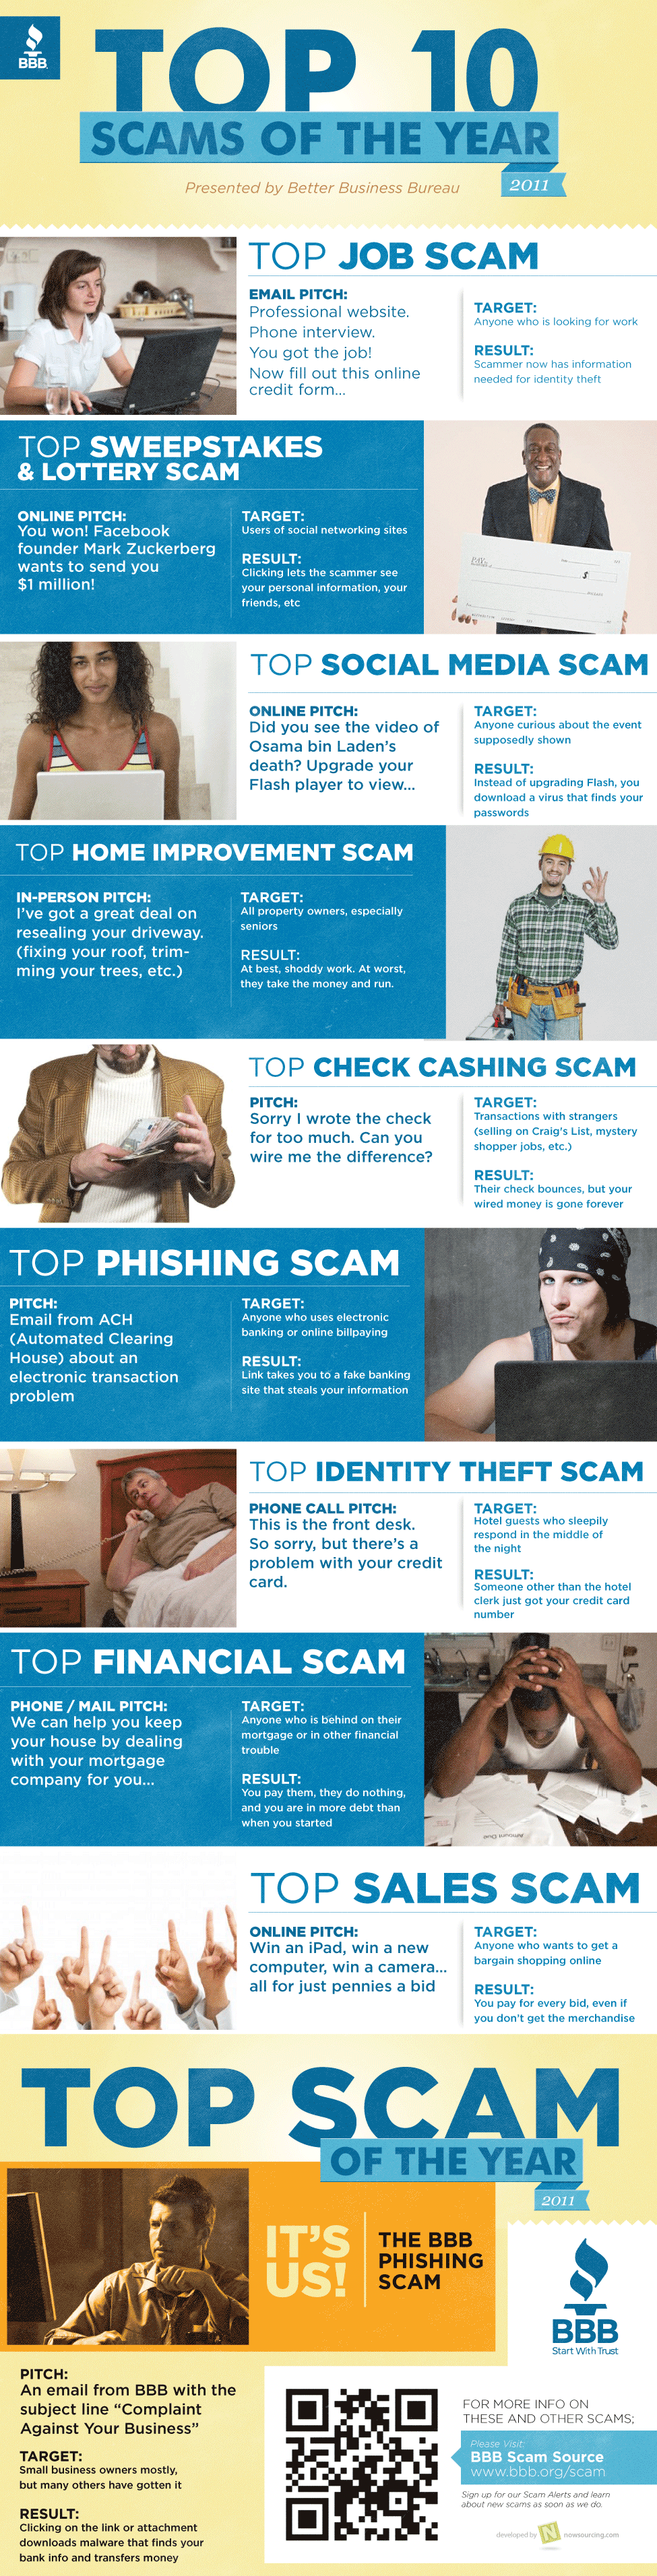 Top 10 Scams of 2011